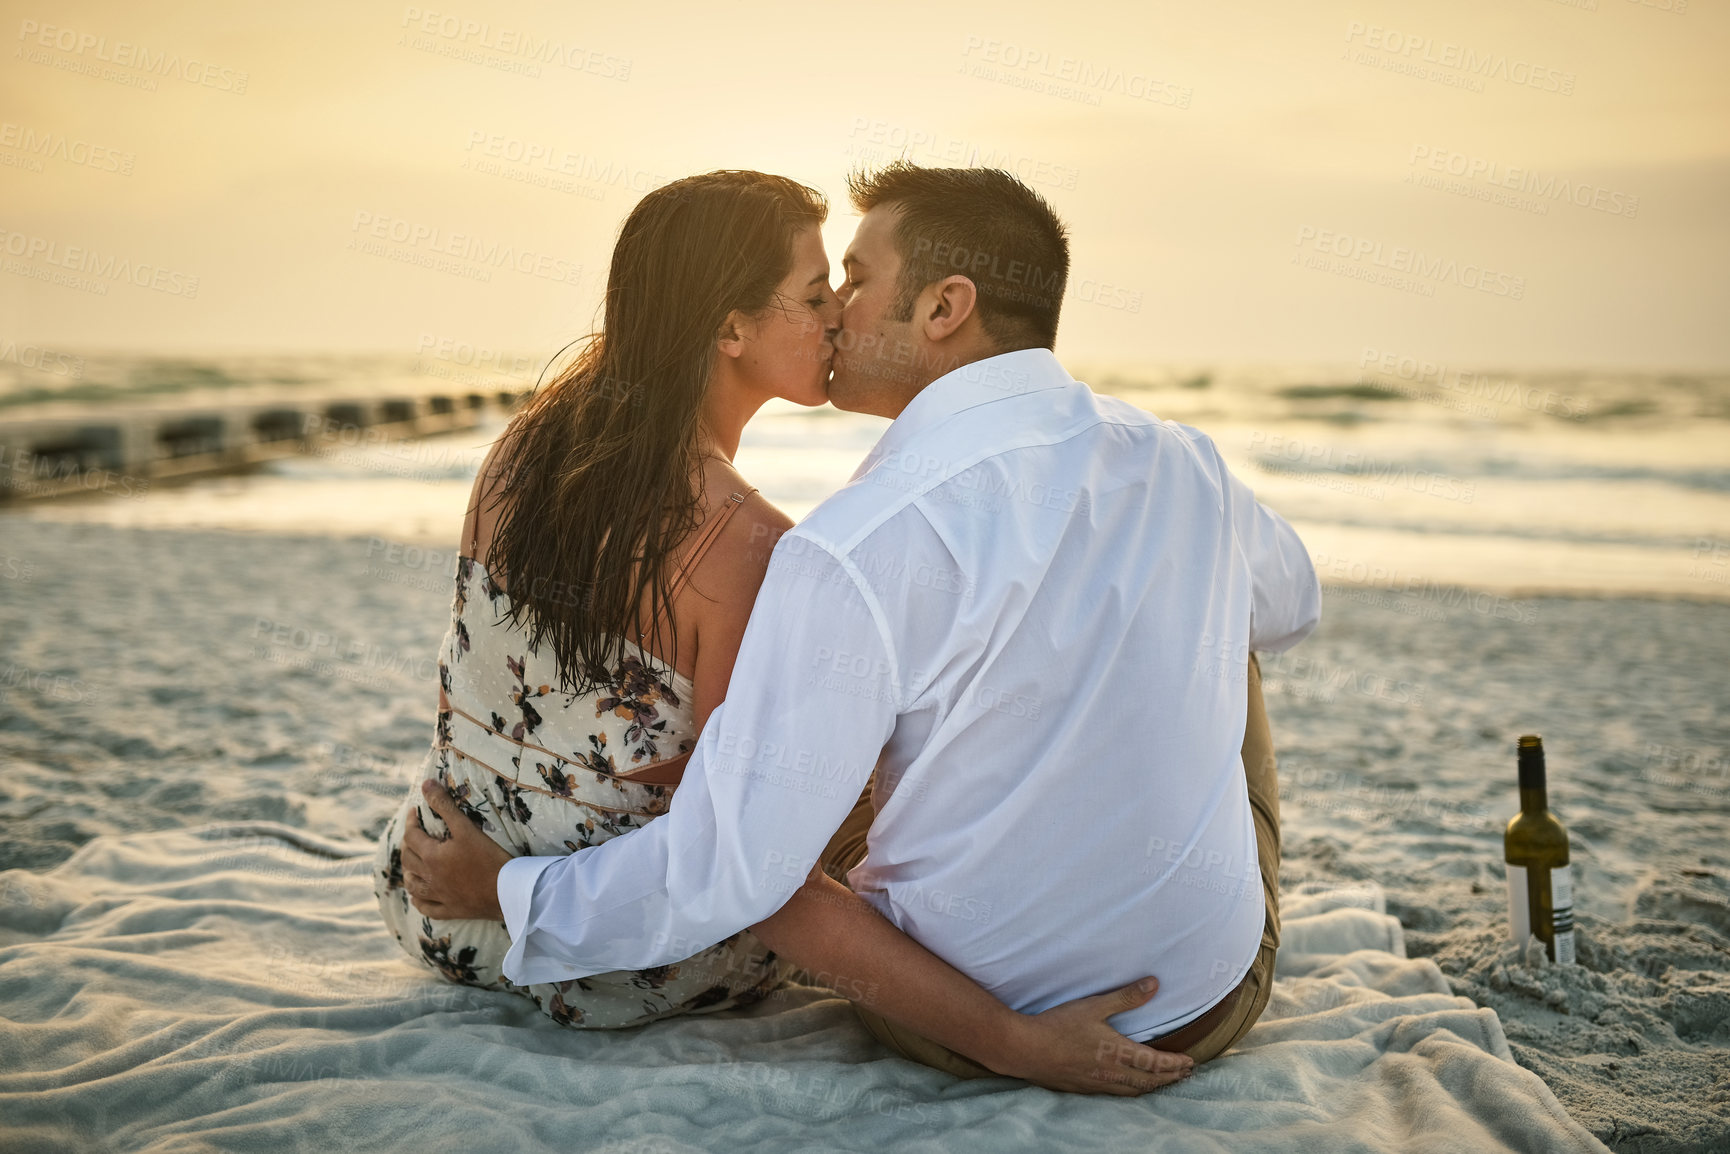 Buy stock photo High angle shot of an affectionate young couple kissing while sitting on the beach